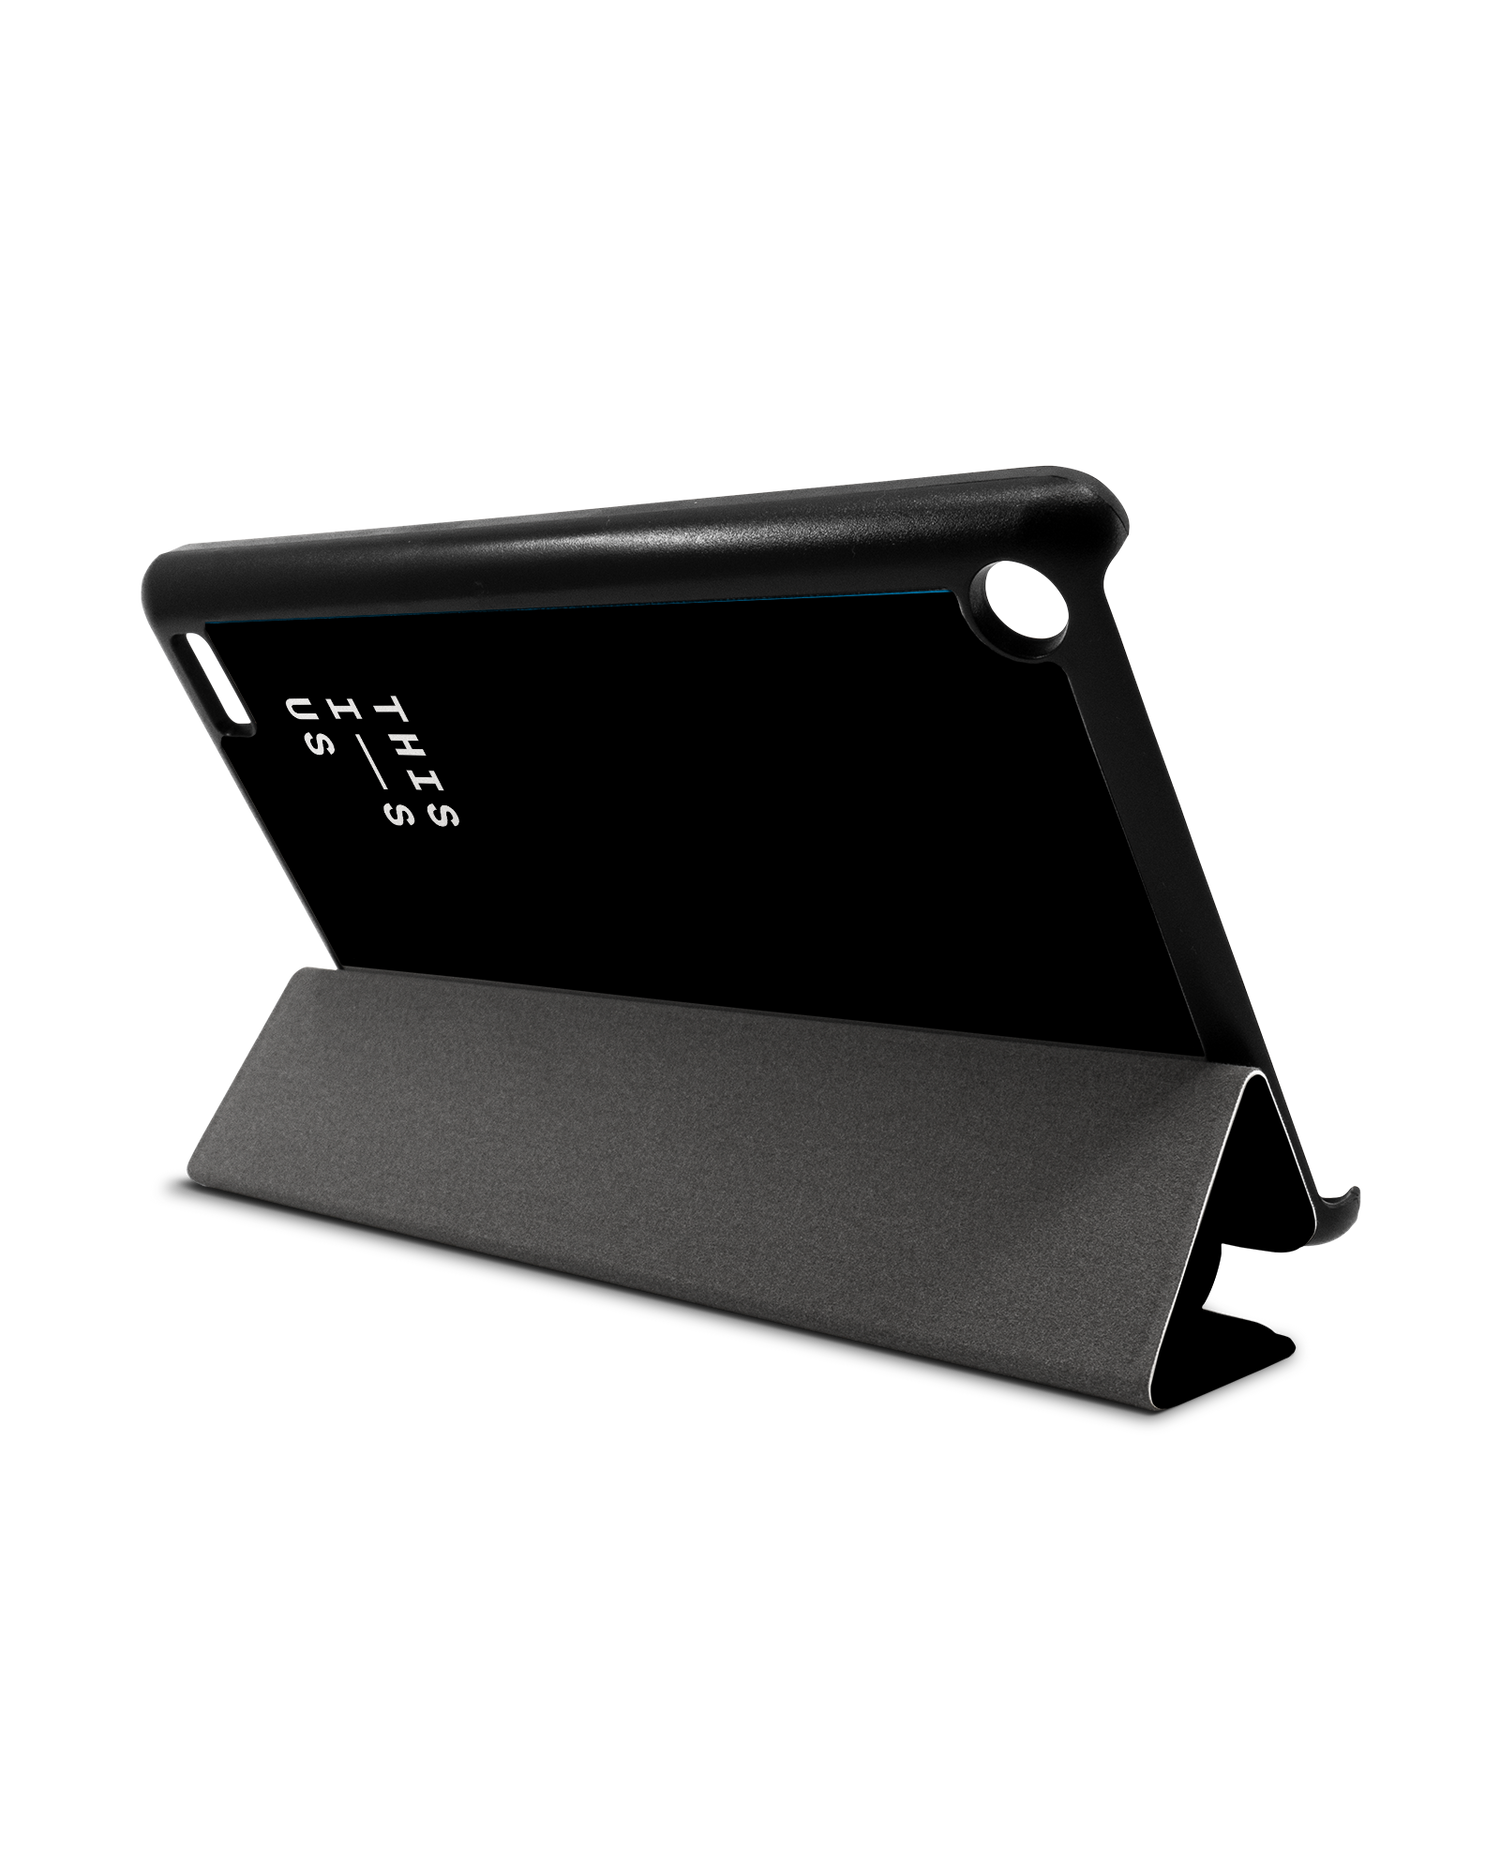 This Is Us Tablet Smart Case for Amazon Fire 7: Used as Stand